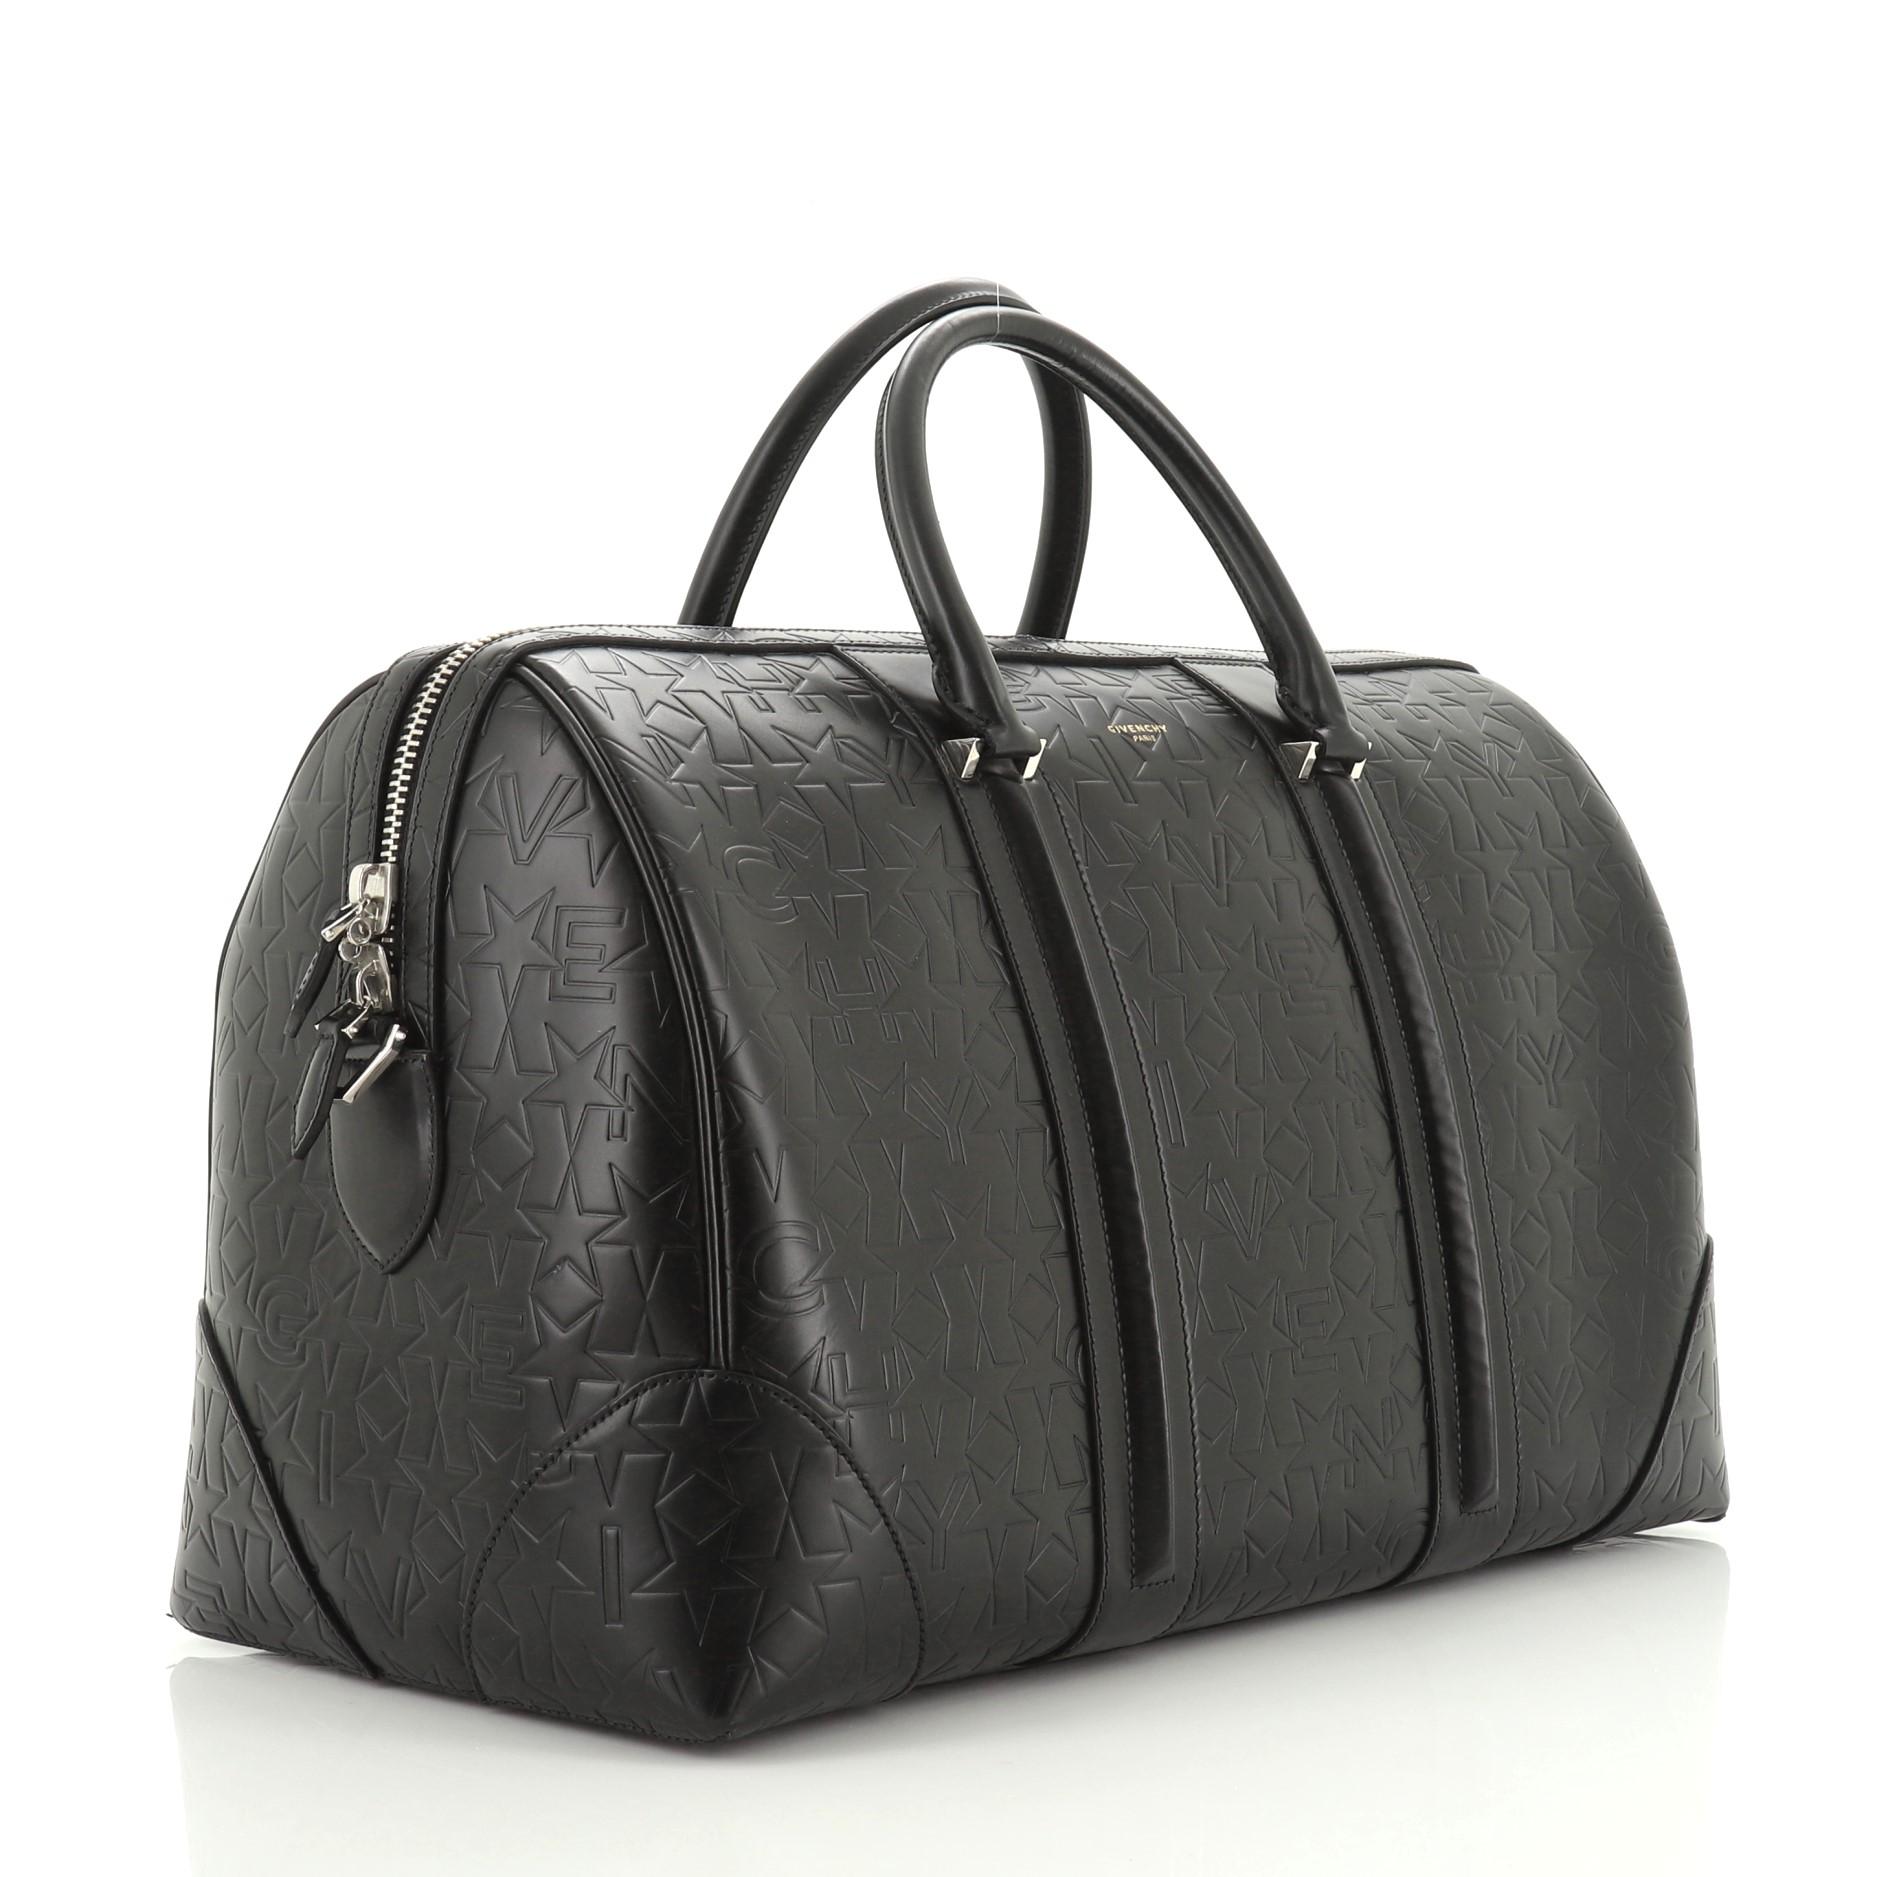 This Givenchy Lucrezia Travel Bag Embossed Leather, crafted from black embossed leather, features dual rolled leather handles and silver-tone hardware. Its zip closure opens to a black fabric interior with side slip pocket. 

Estimated Retail Price: